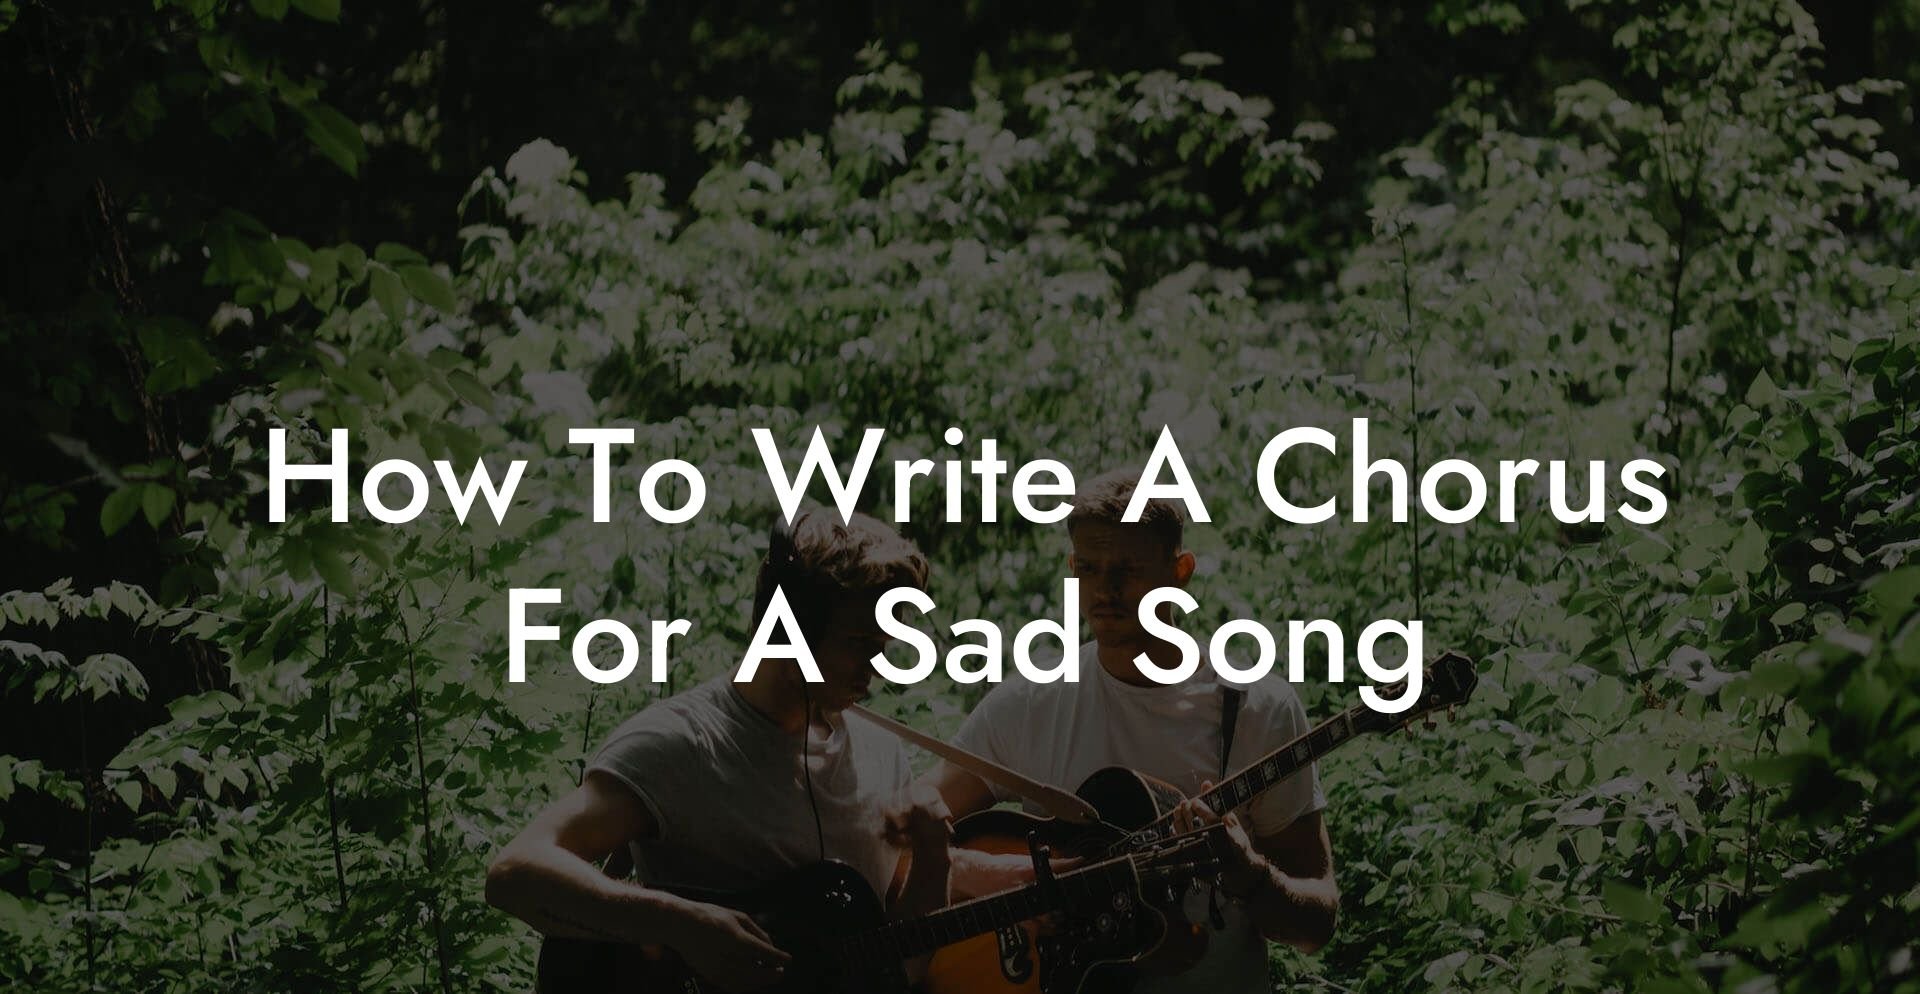 how to write a chorus for a sad song lyric assistant